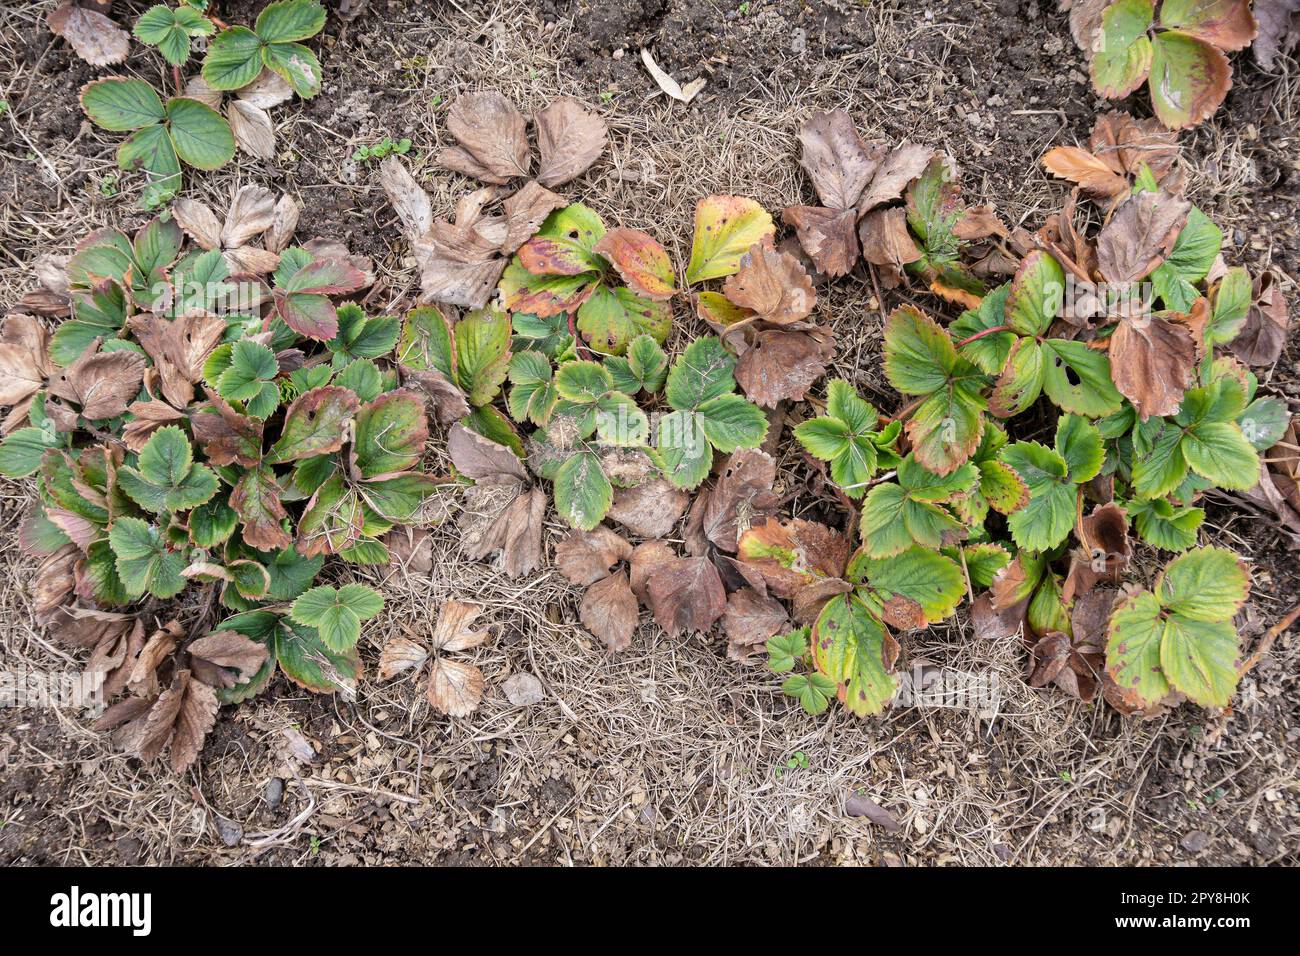 Old Strawberry bed in Grass clippings mulch before cleanup in a Spring Garden. Plants with Dry Brown Leaves with Reddish-brown Spots. Symptoms of Strawberry Disease. Top view. Stock Photo